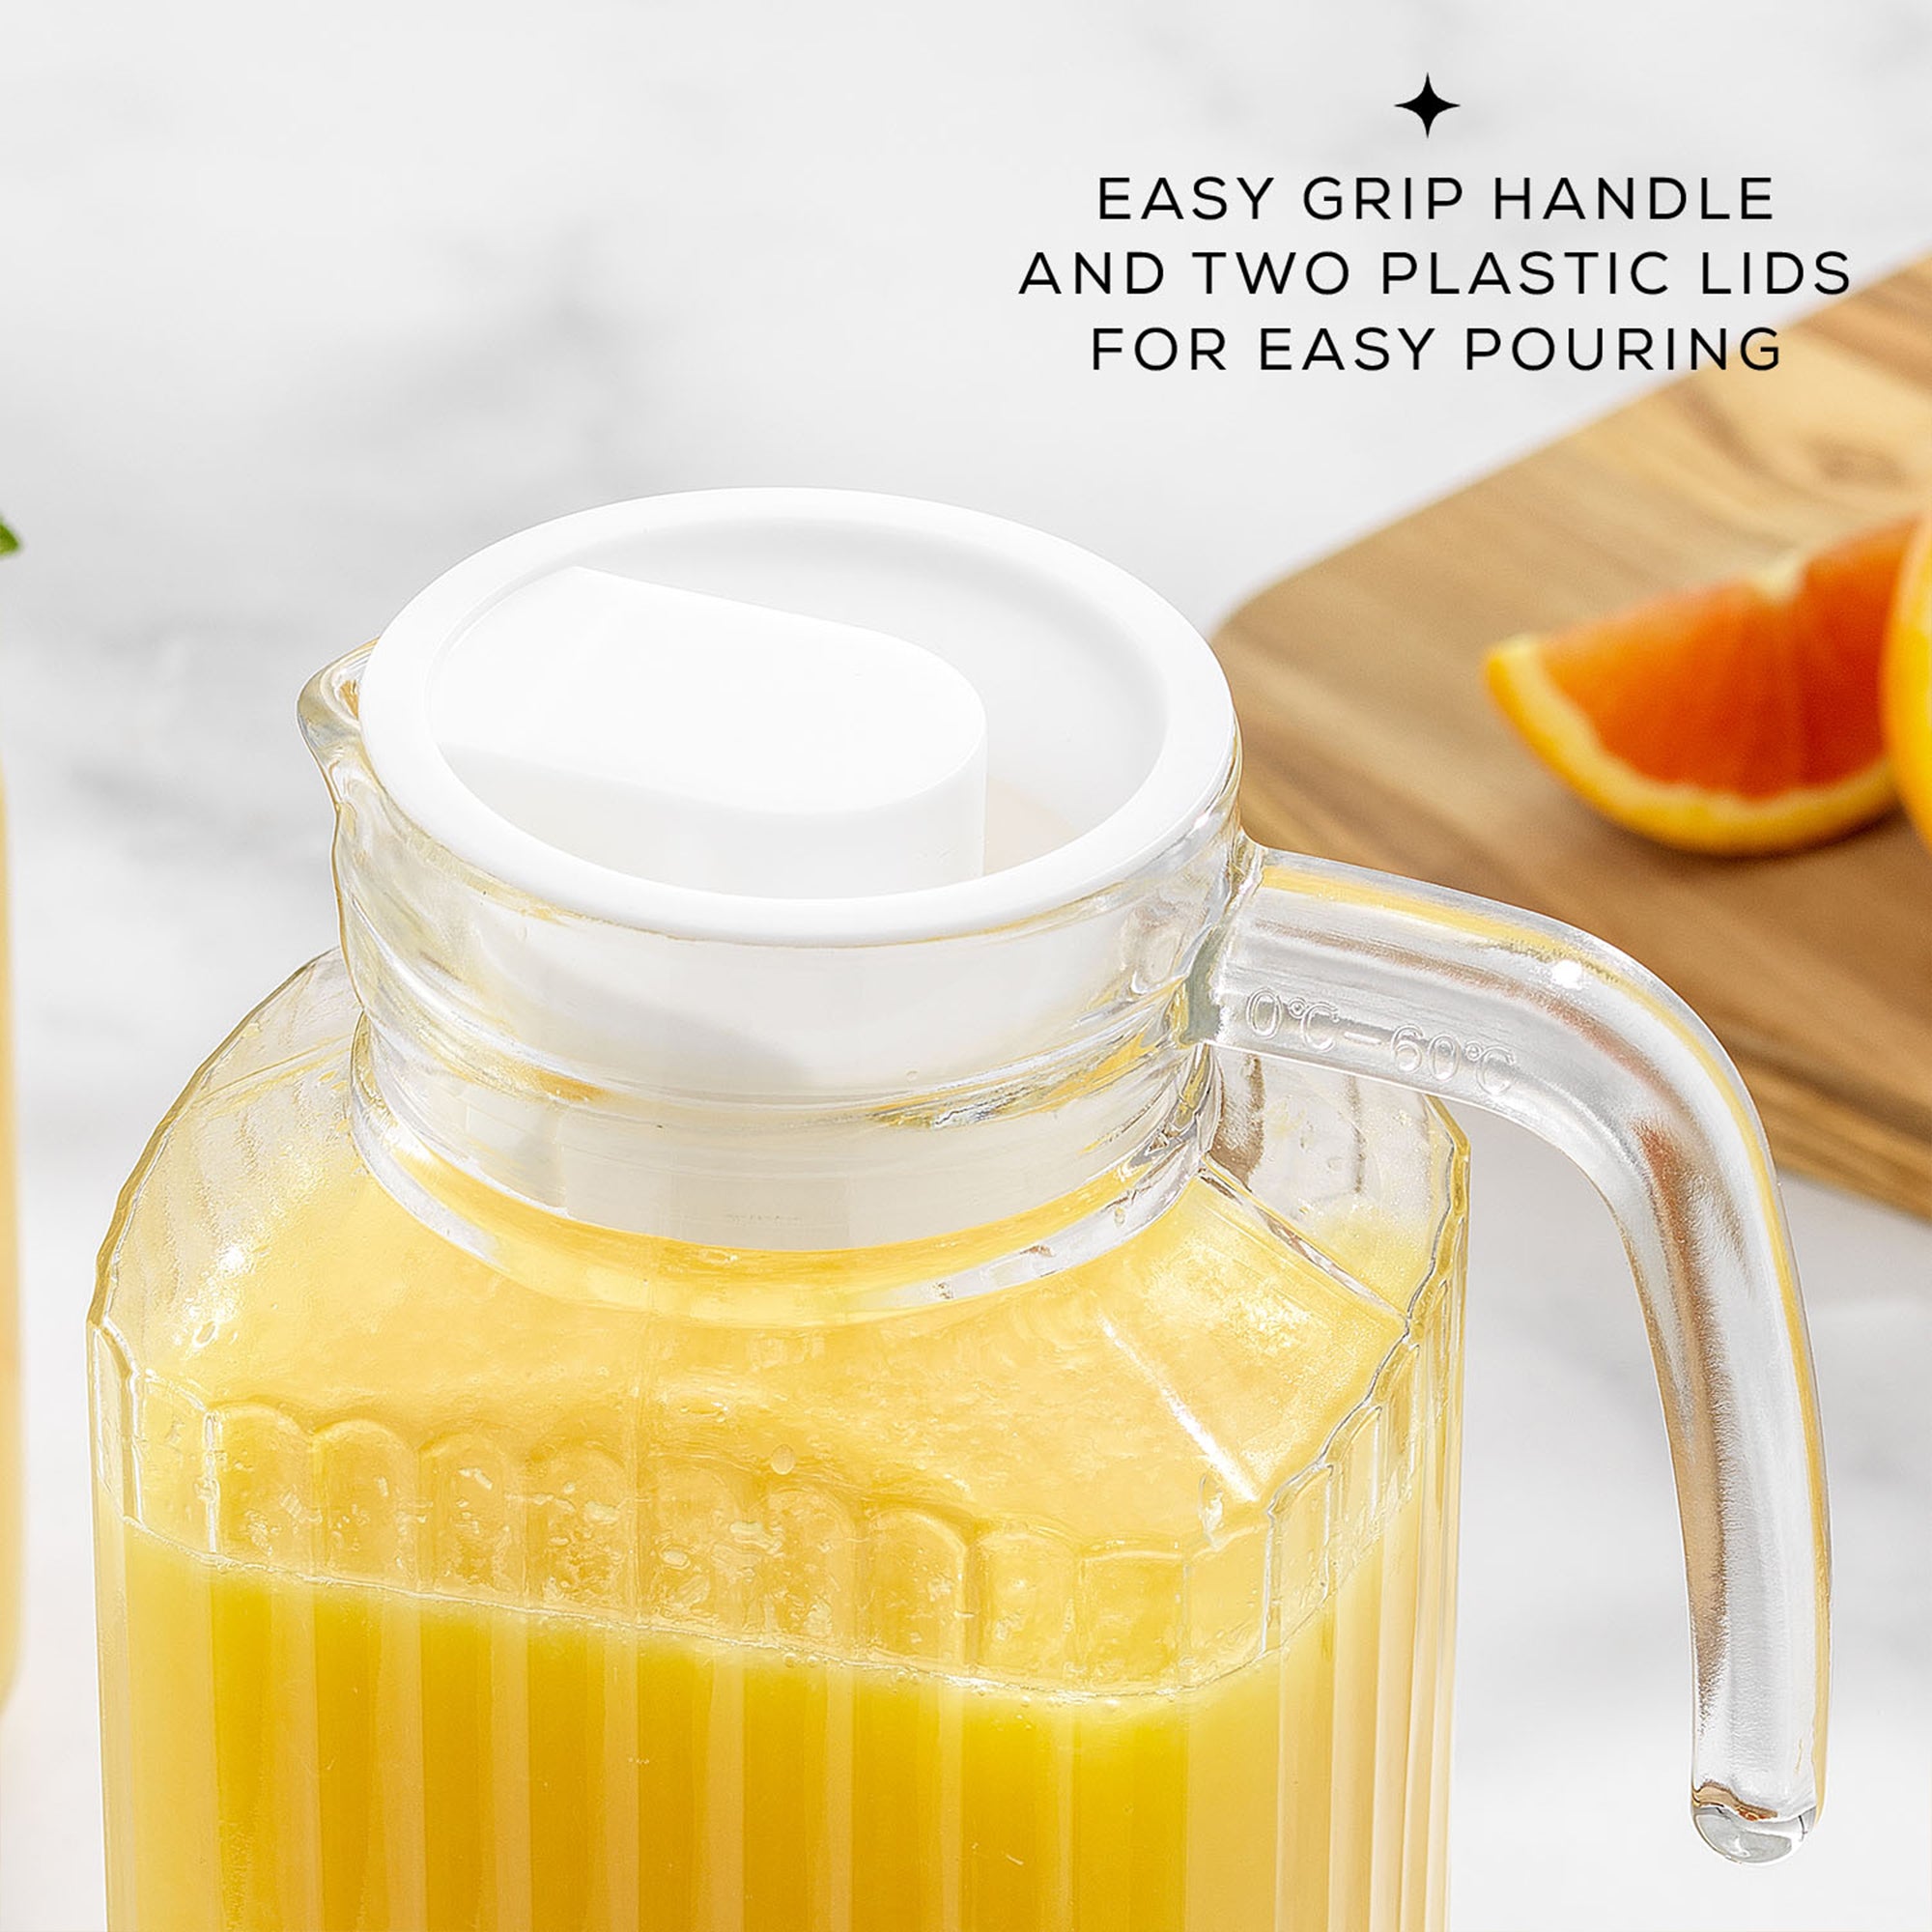 A clear glass pitcher with a handle sits on a table. The pitcher is filled with orange juice and has a white lid. Text on the image reads "EASY GRIP HANDLE AND TWO PLASTIC LIDS FOR EASY POURING". This is a JoyJolt Beverage Serveware Glass Pitcher, 60oz.